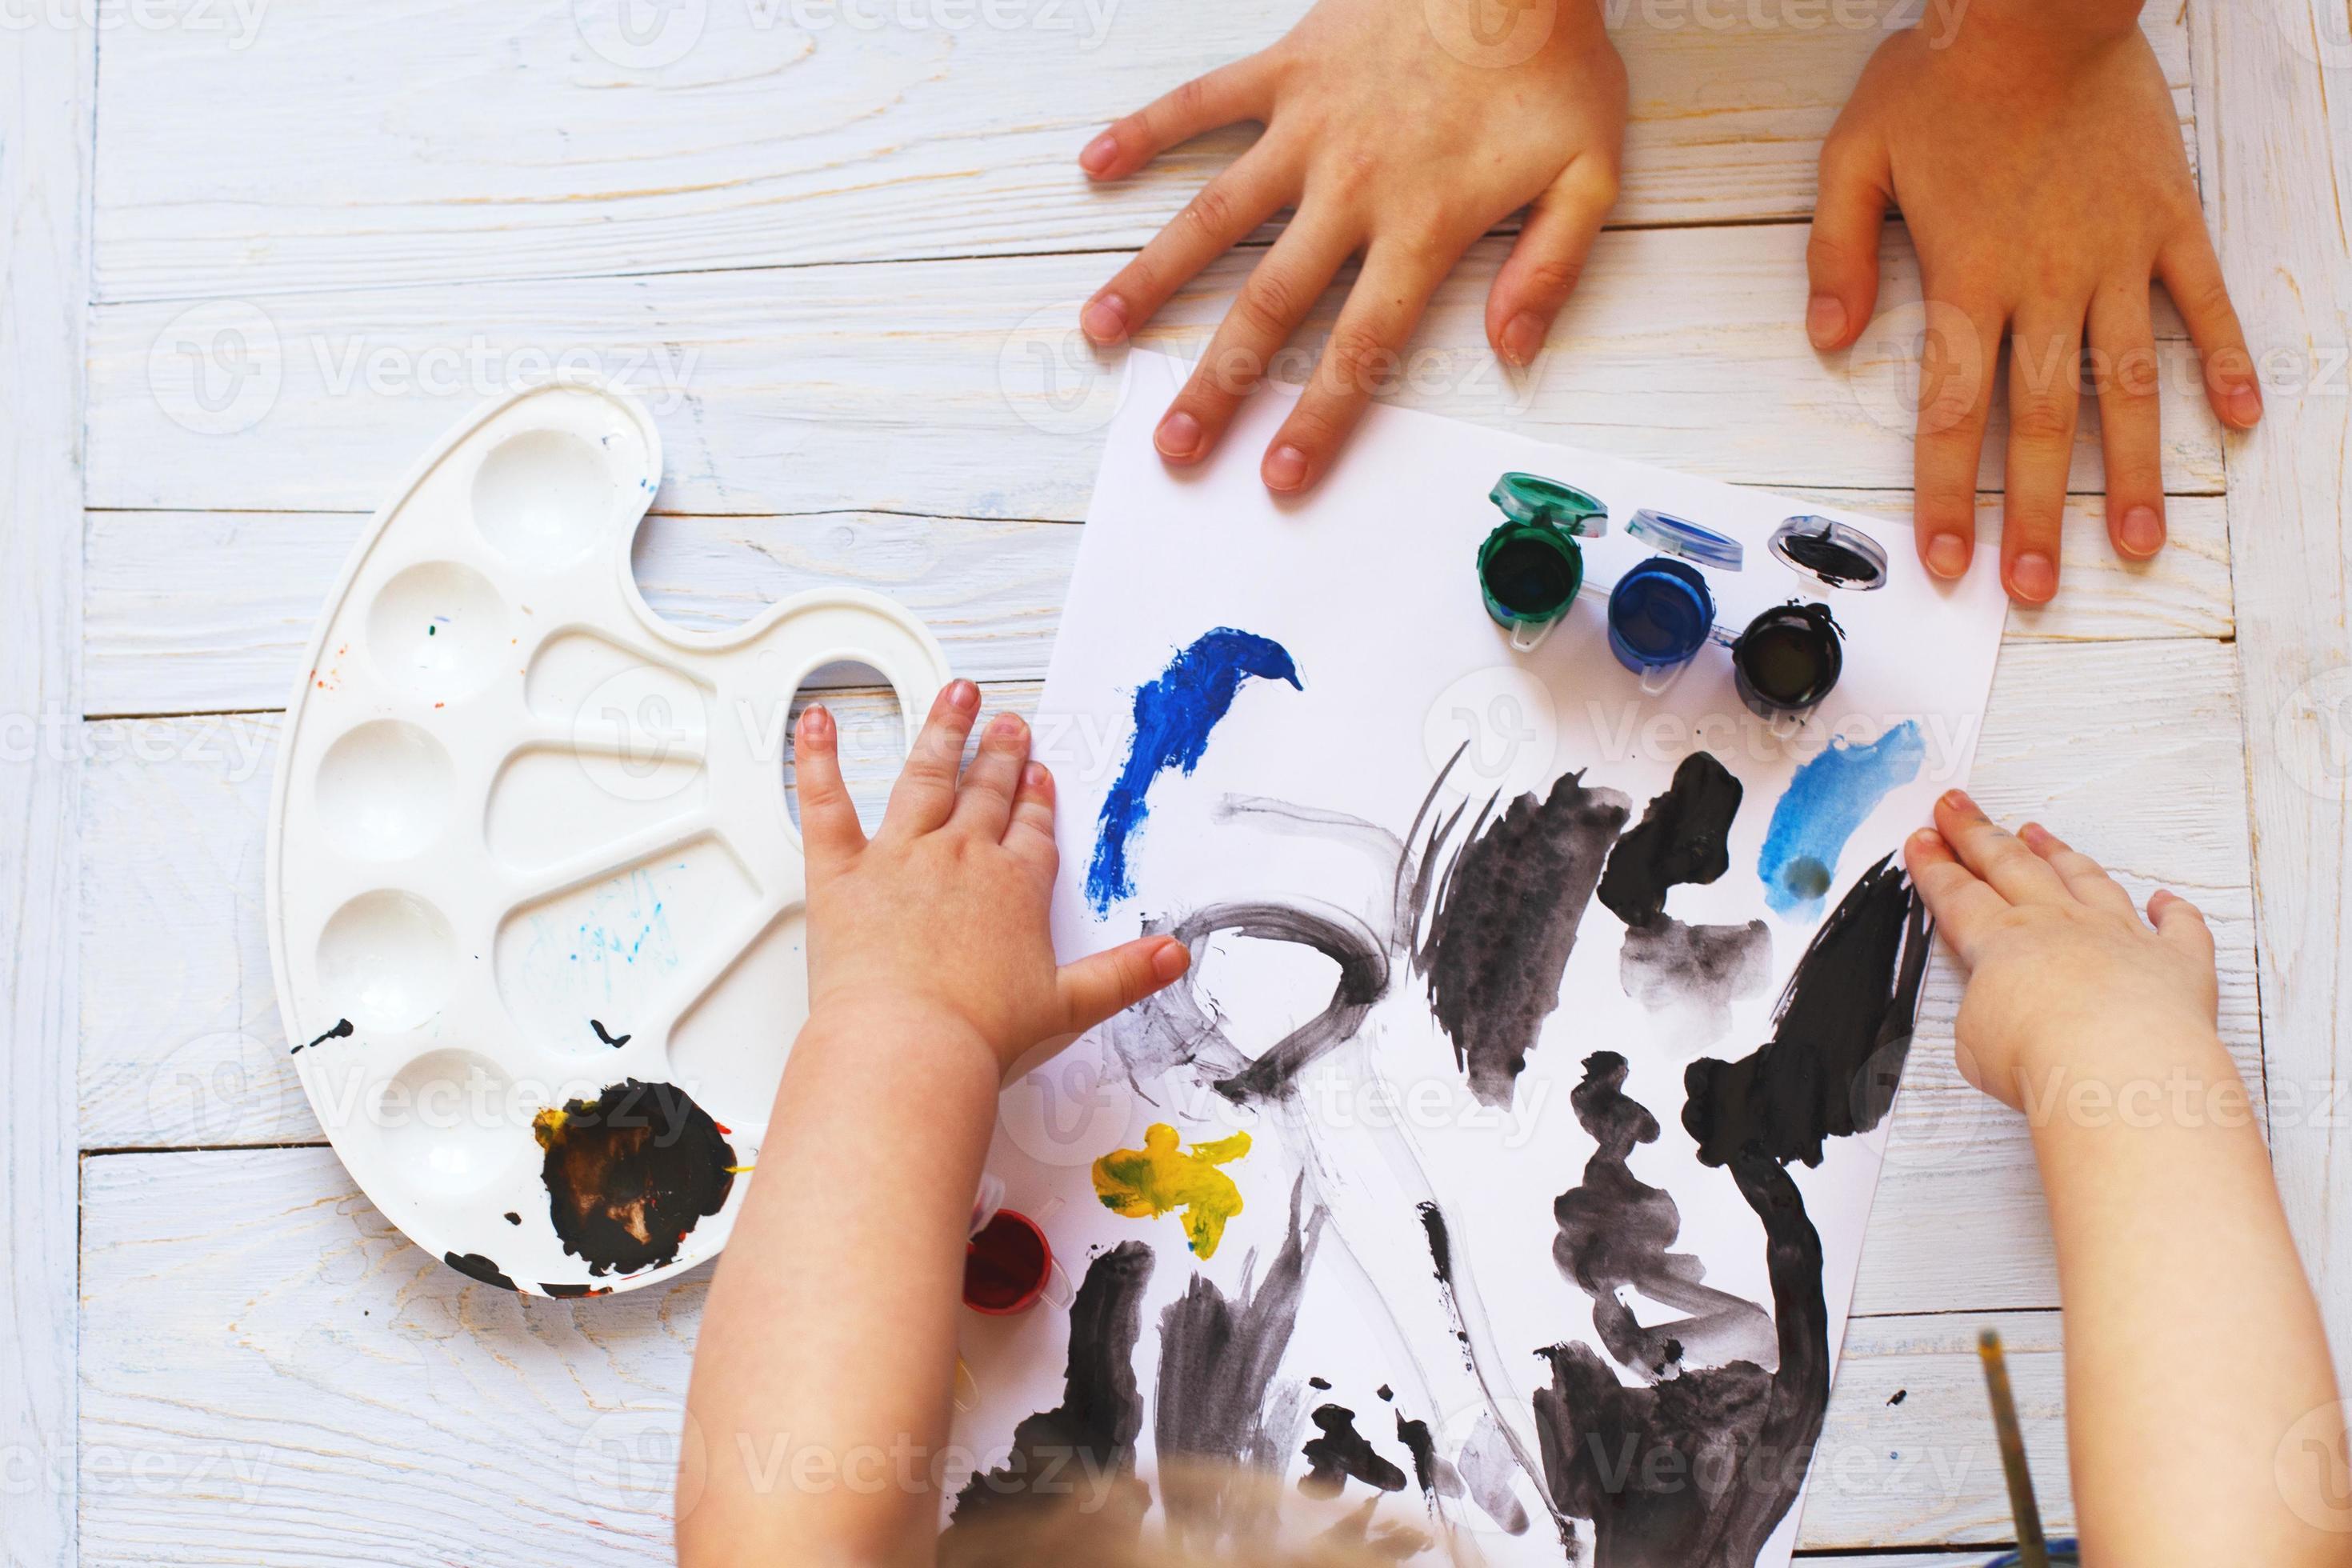 Child drawing top view. Artwork workplace with creative accessories. Flat  lay art tools for painting. Stock Photo by ©soleg 104015220